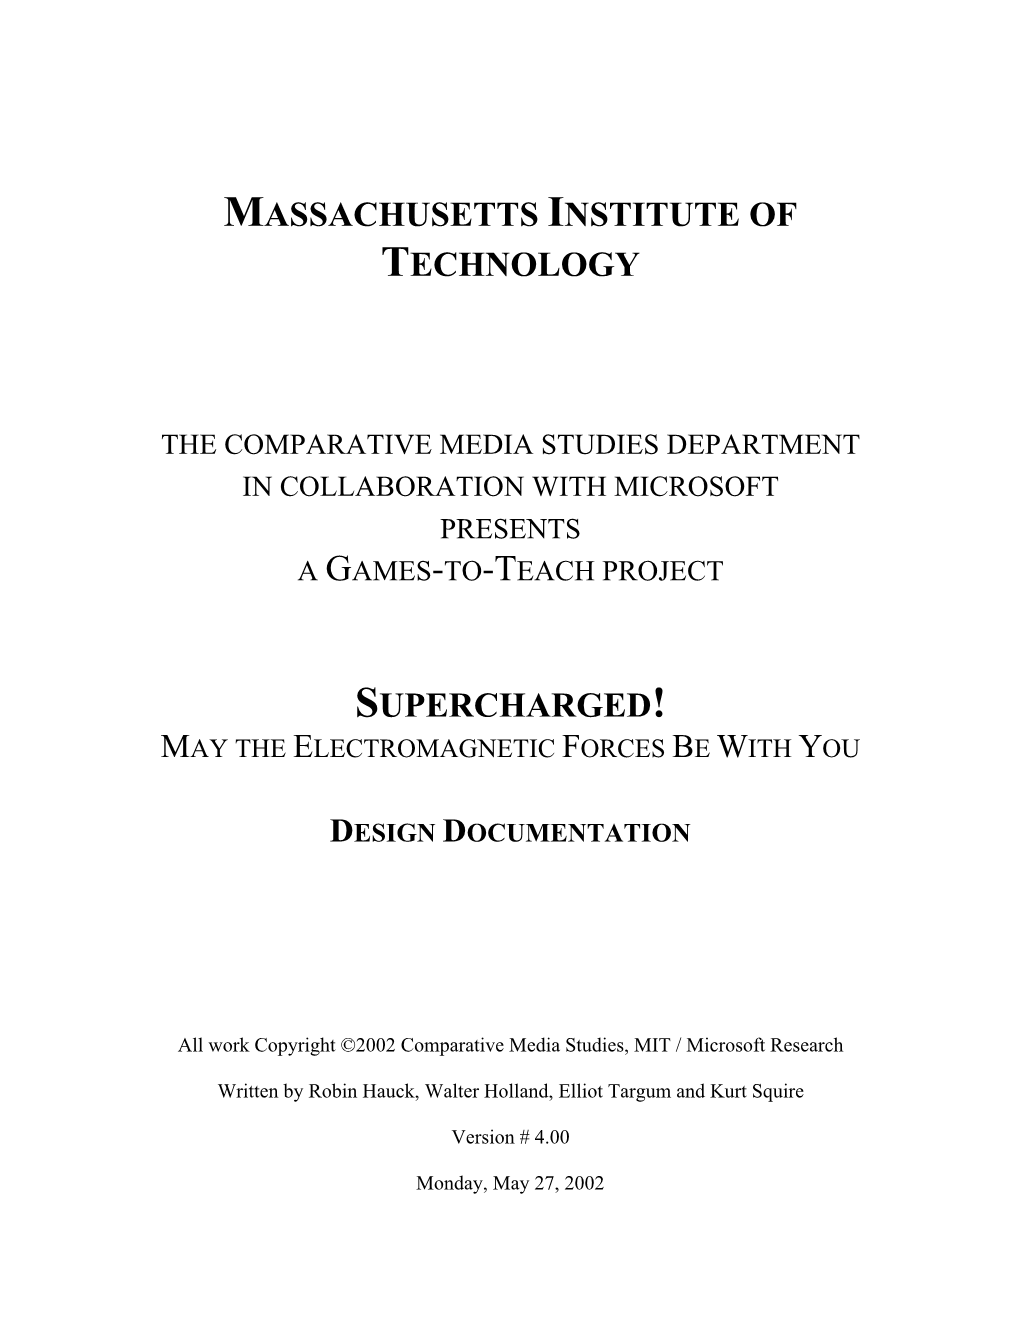 Massachusetts Institute of Technology Supercharged!